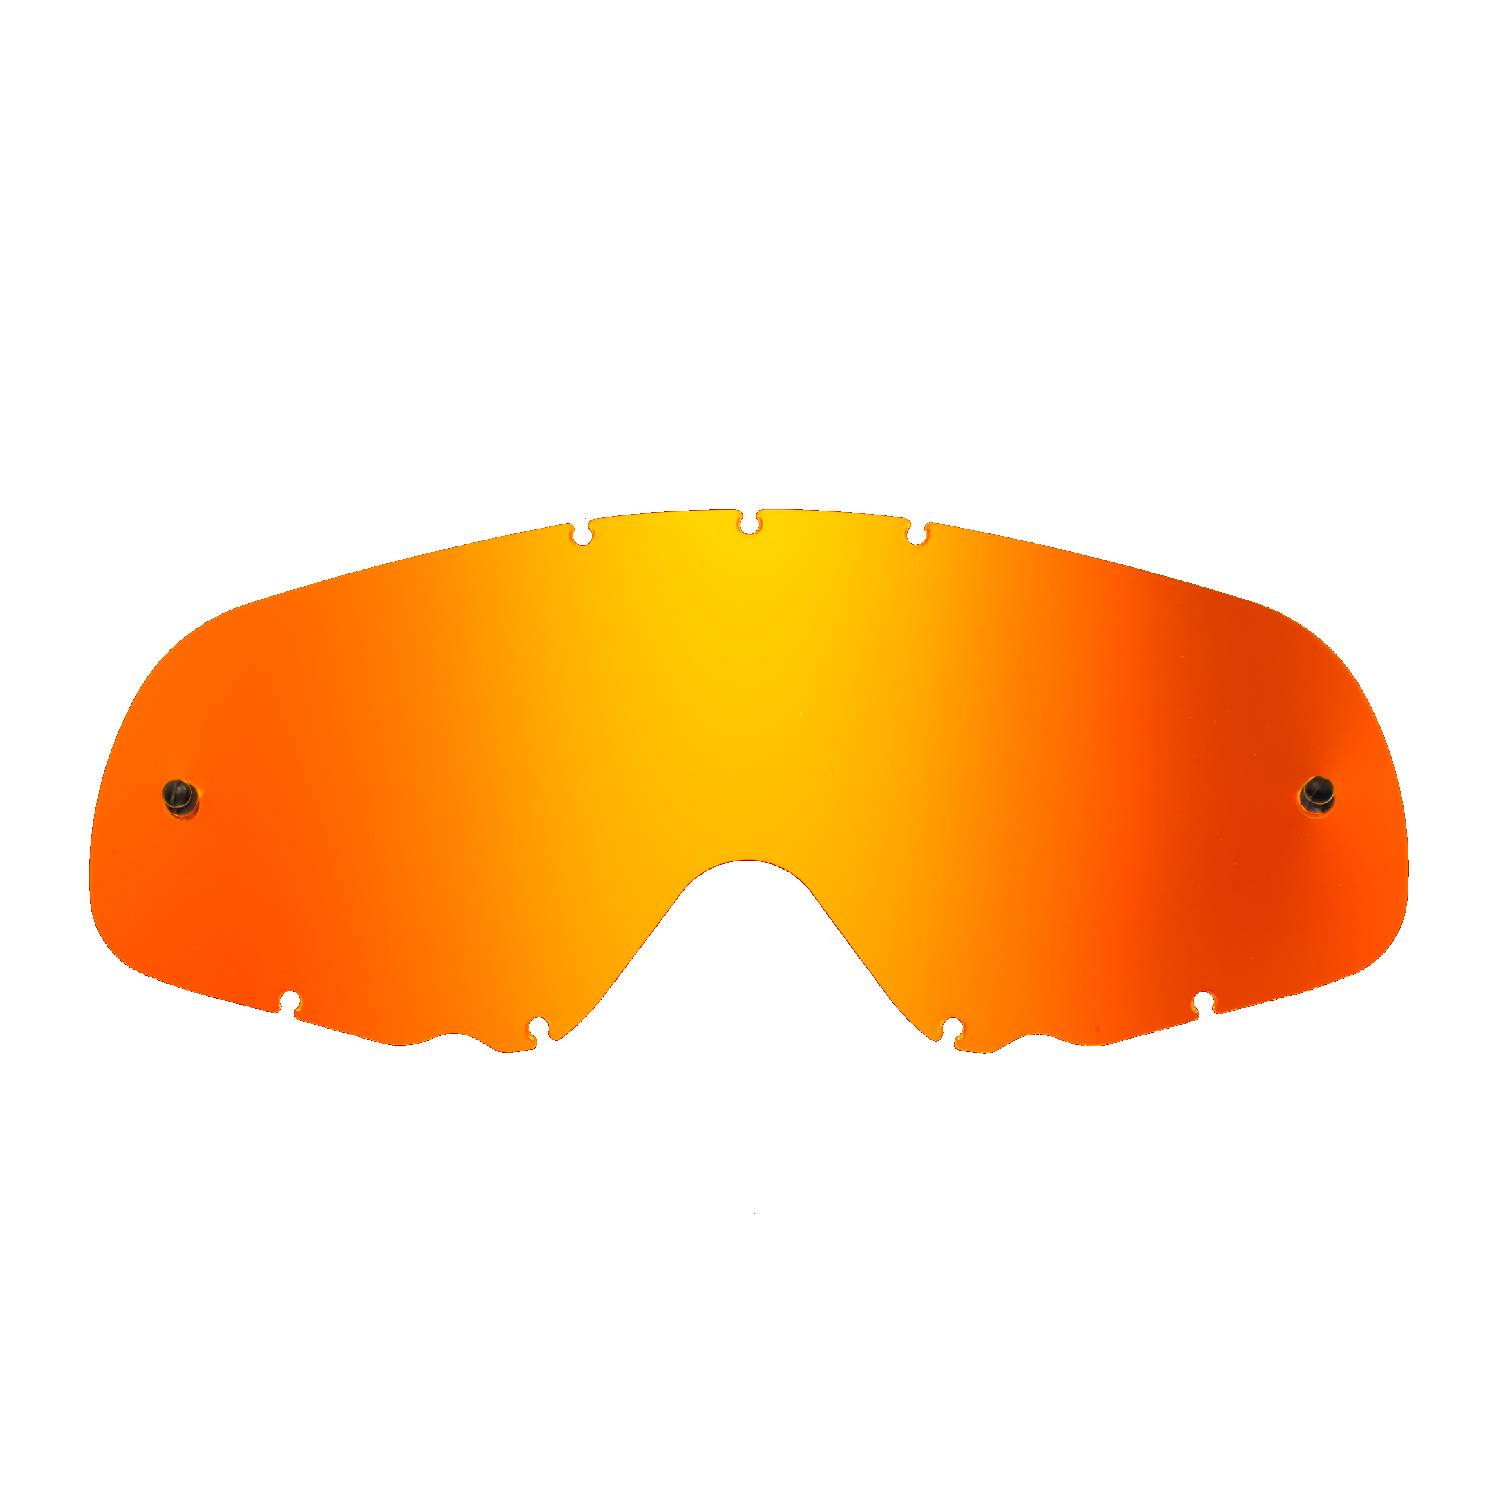 red-toned mirrored replacement lenses  compatible for Oakley Crowbar goggle